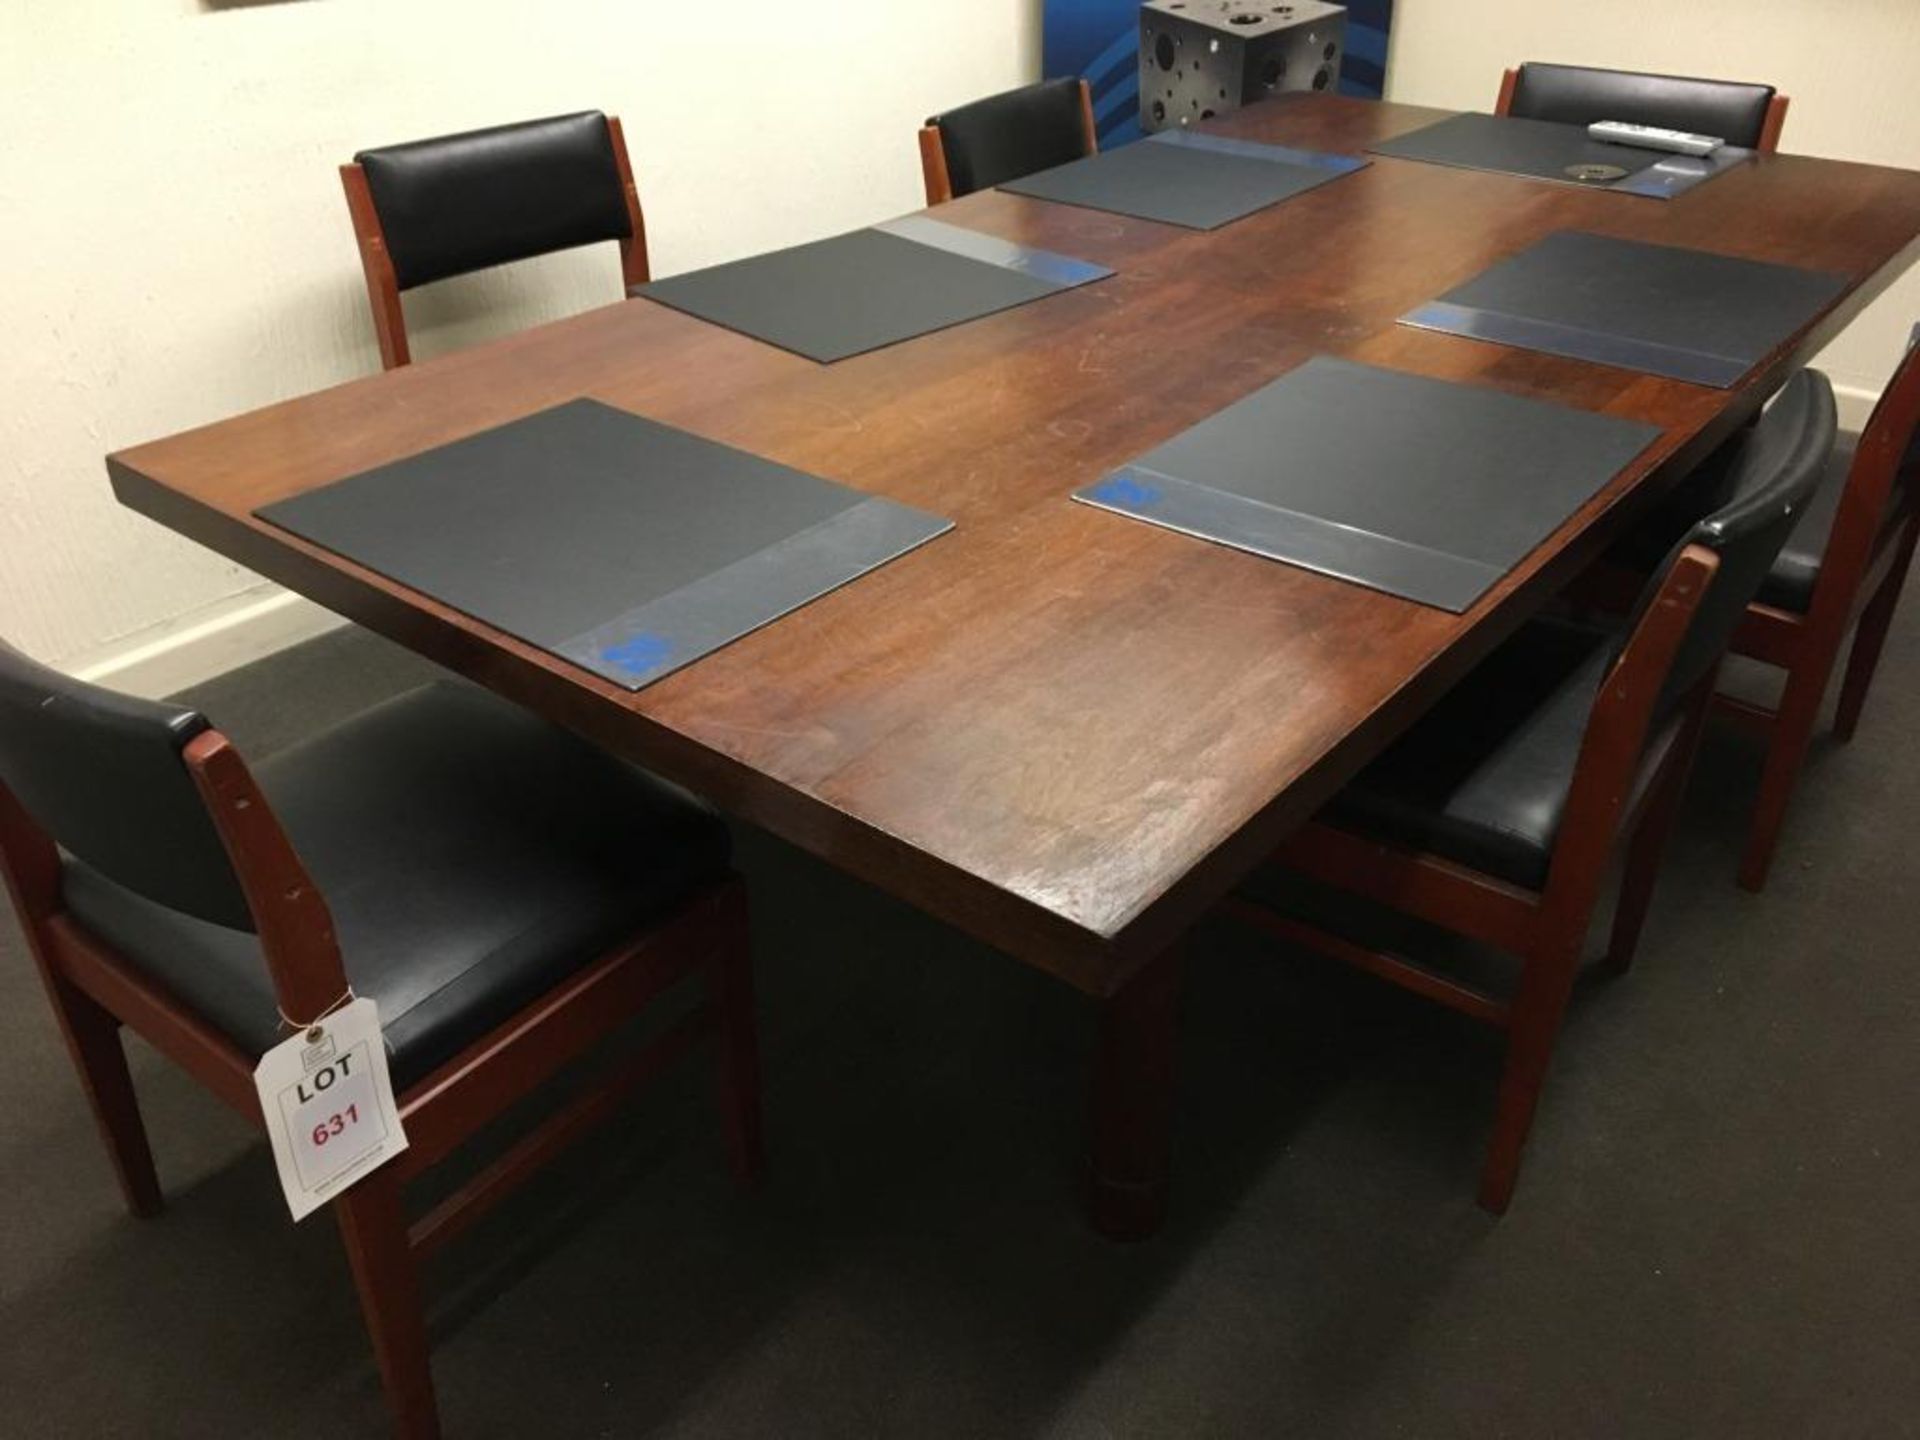 A wood veneer meeting table, 96" x 48", with seven chairs and six black desk mats (Please note: